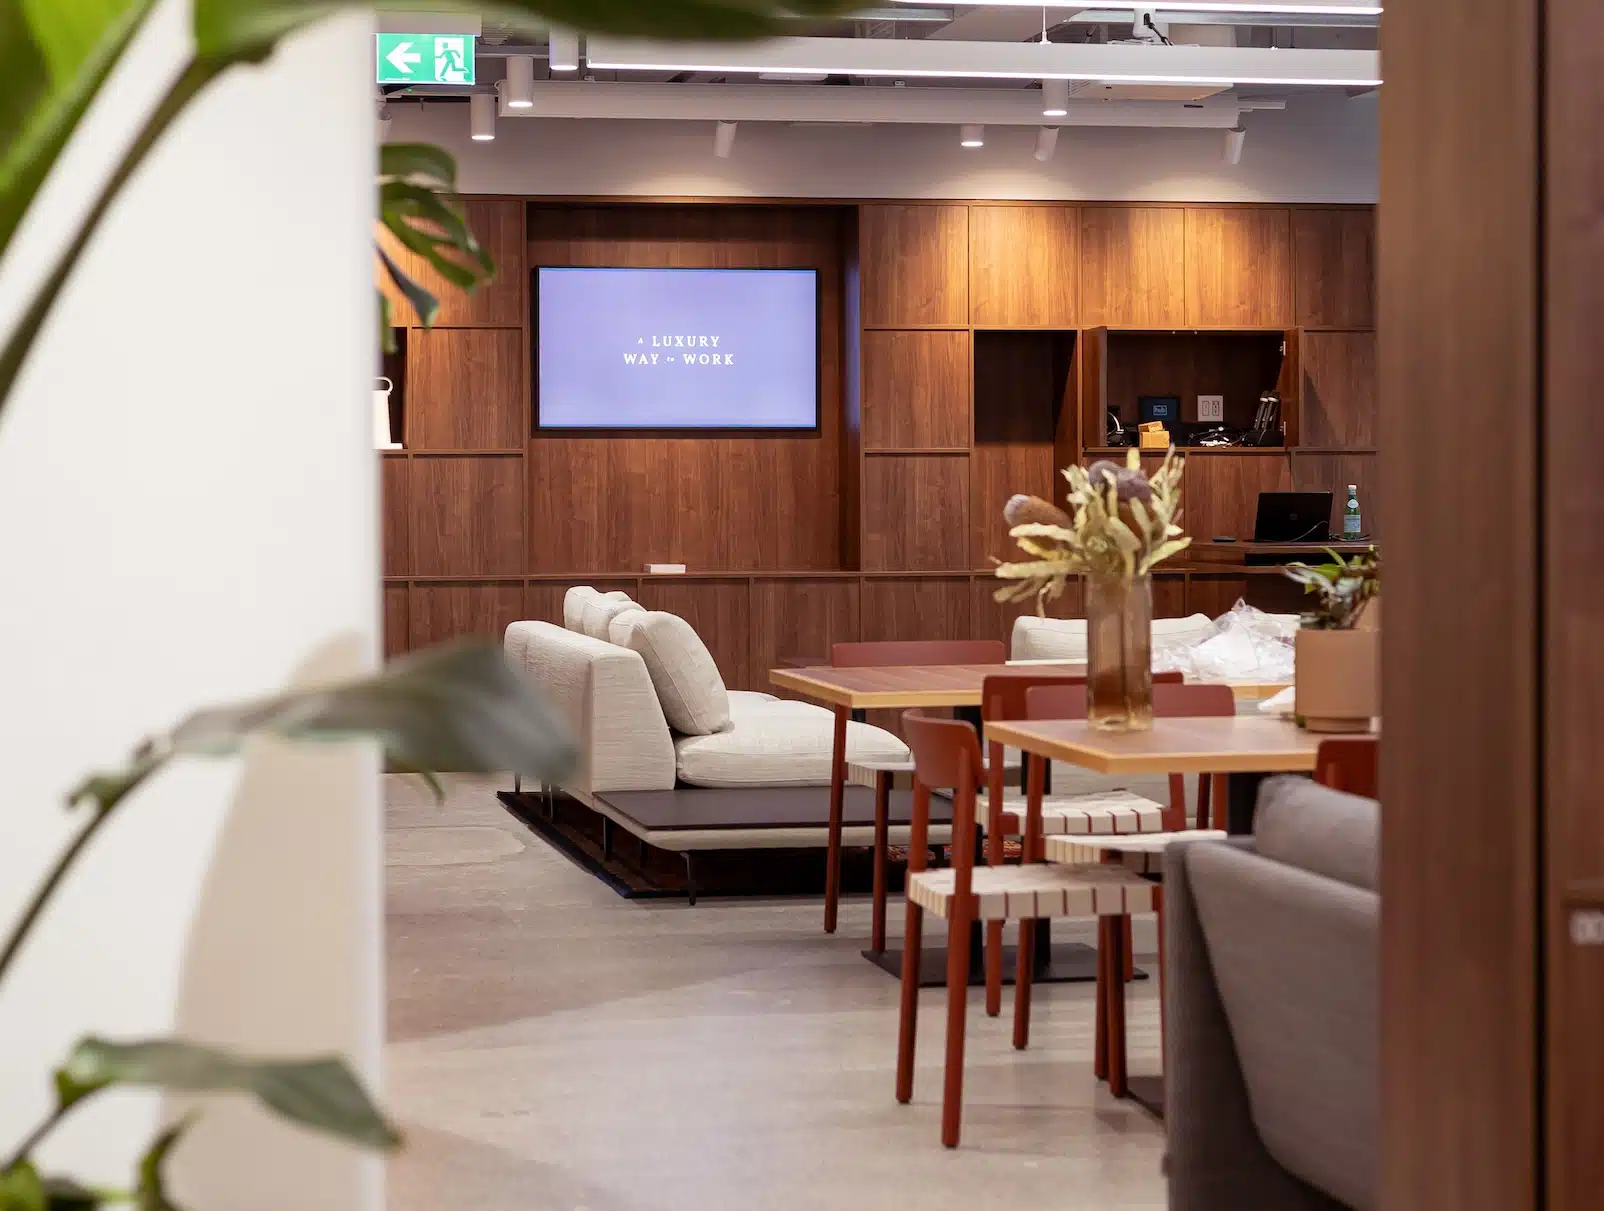 Hub Martin Place: Redefining our members’ workspace experience